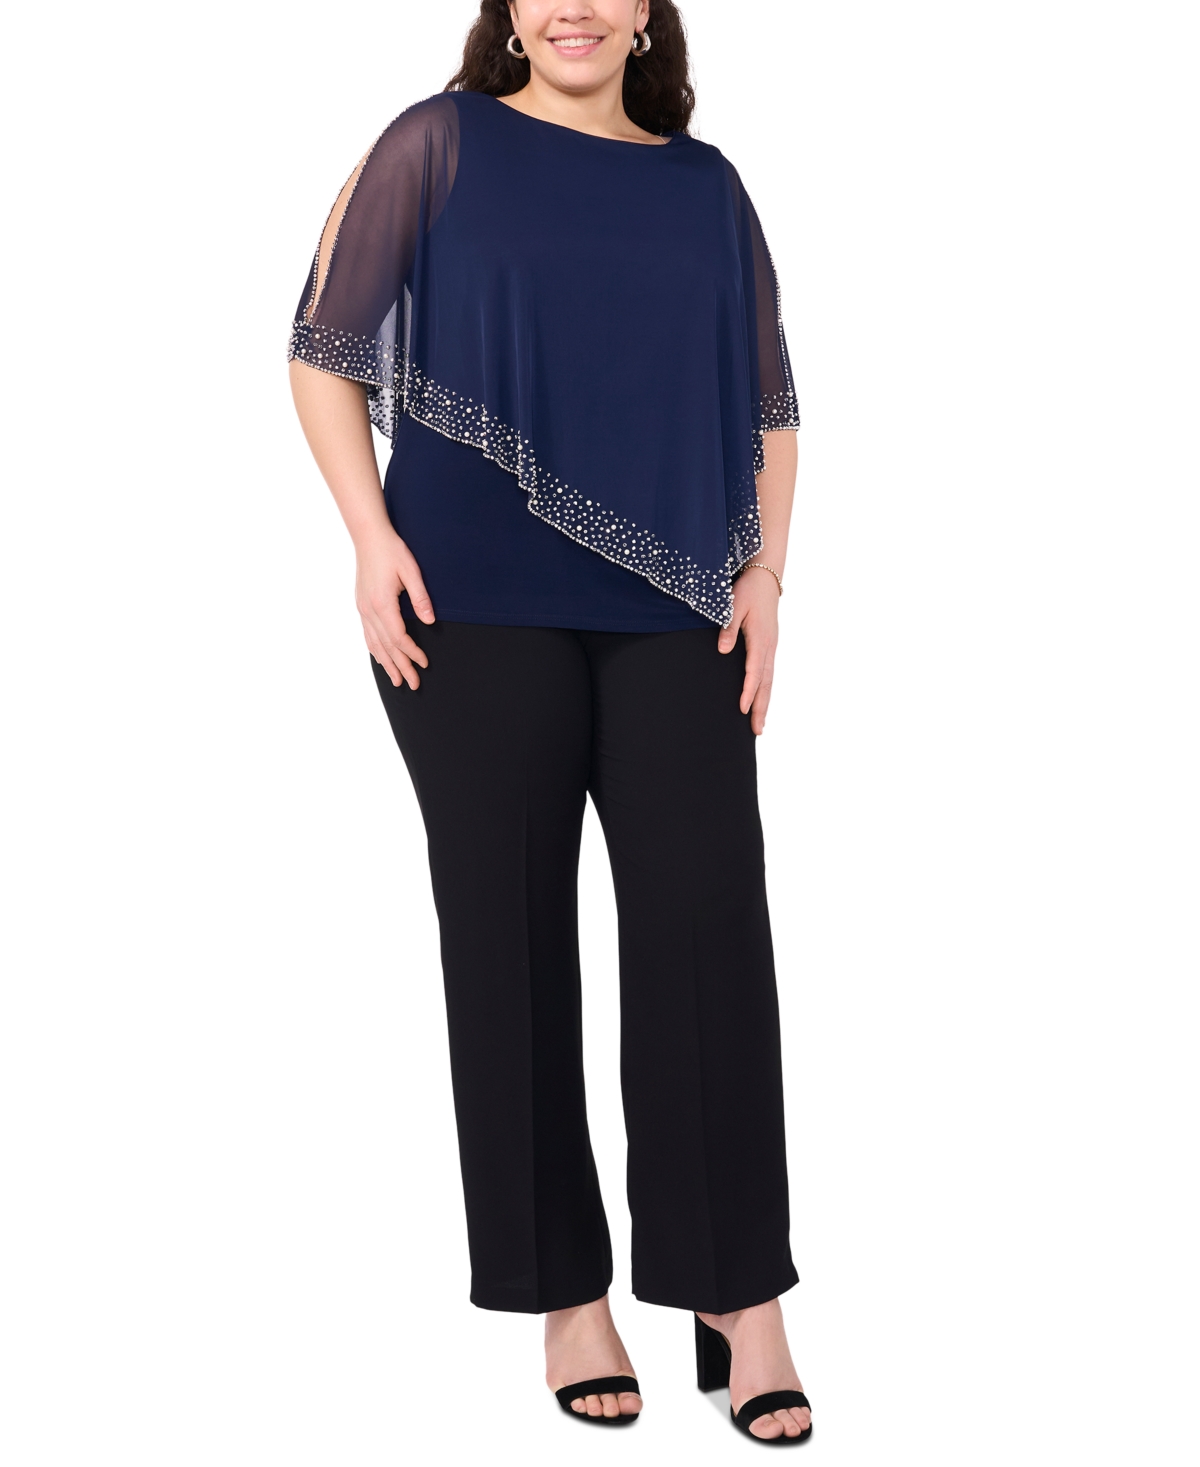 Plus Size Embellished Asymmetric Cape Overlay Top - Navy